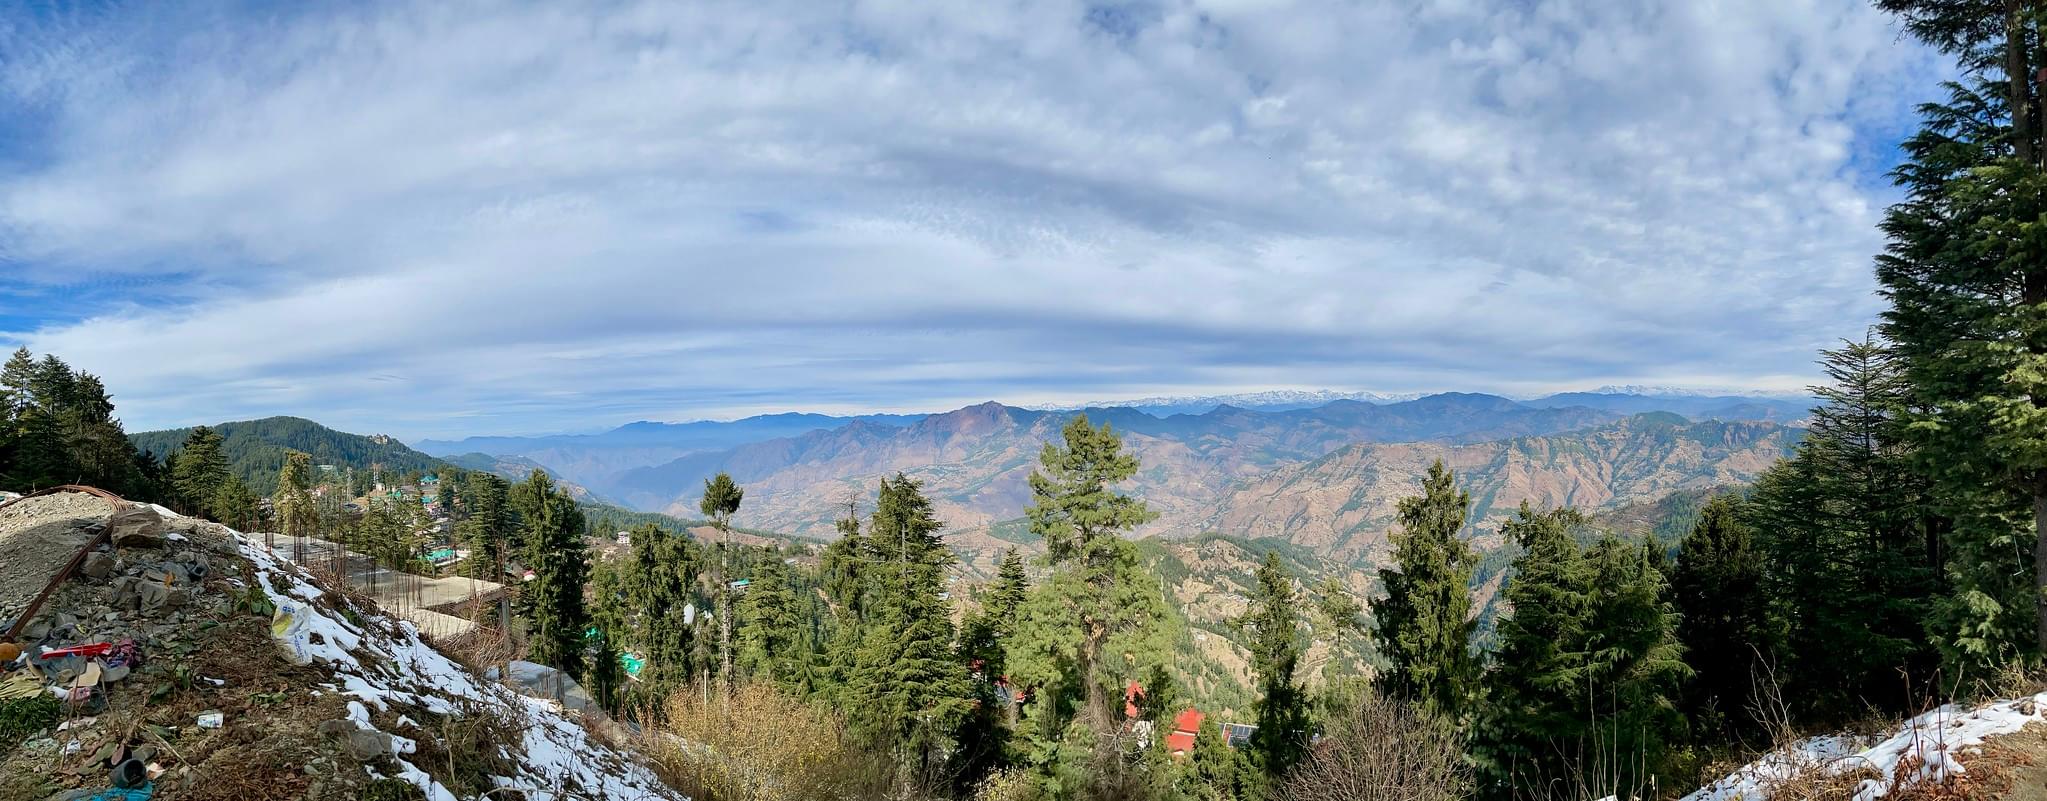 Chail Overview